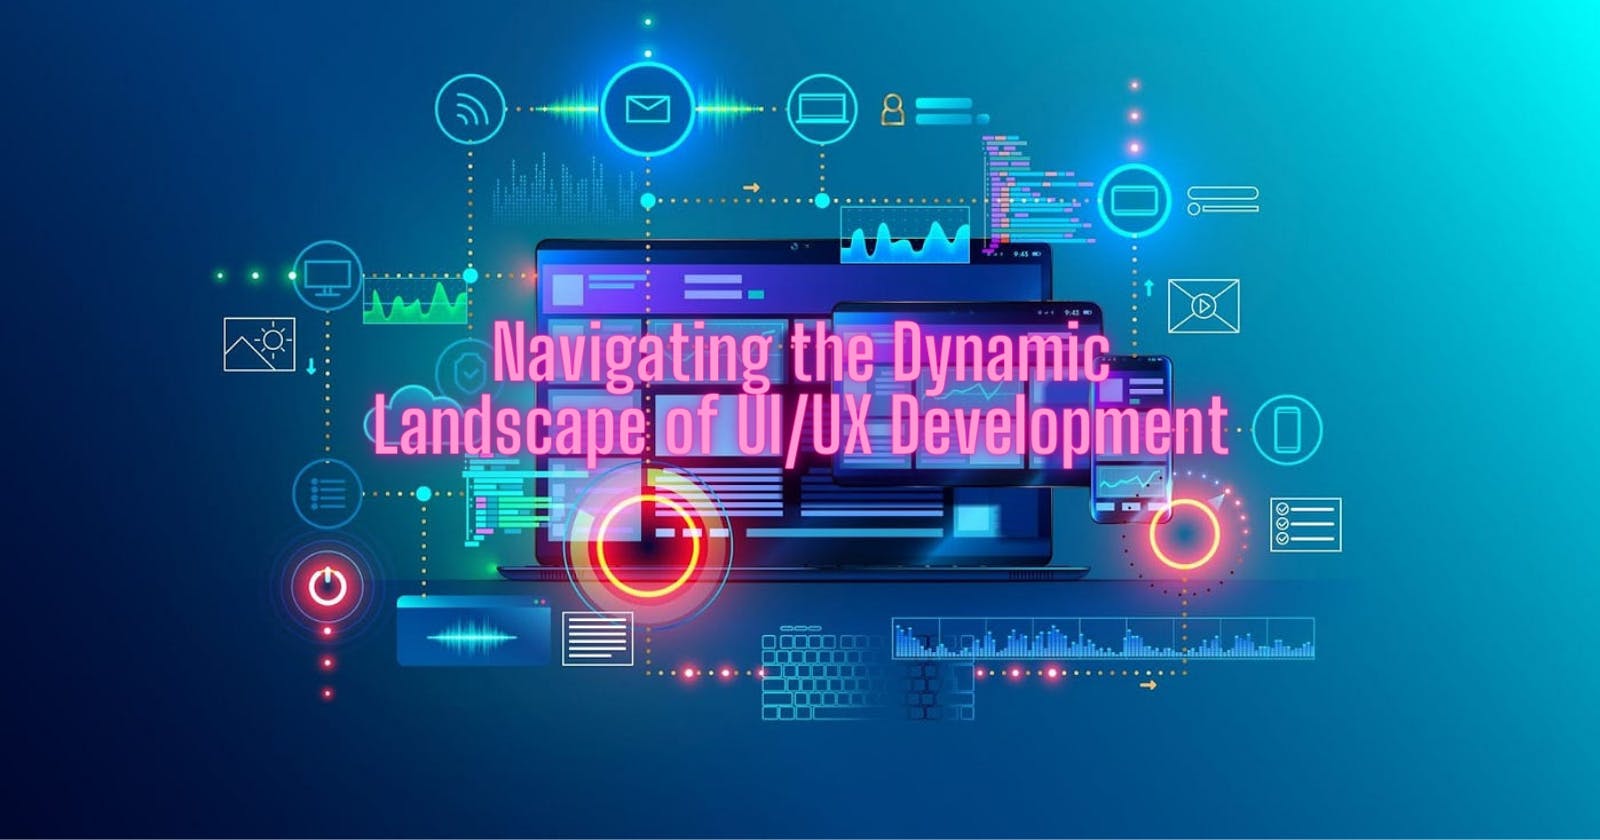 Navigating the Dynamic Landscape of UI/UX Development: Trends, Demands, and the Current Scenario